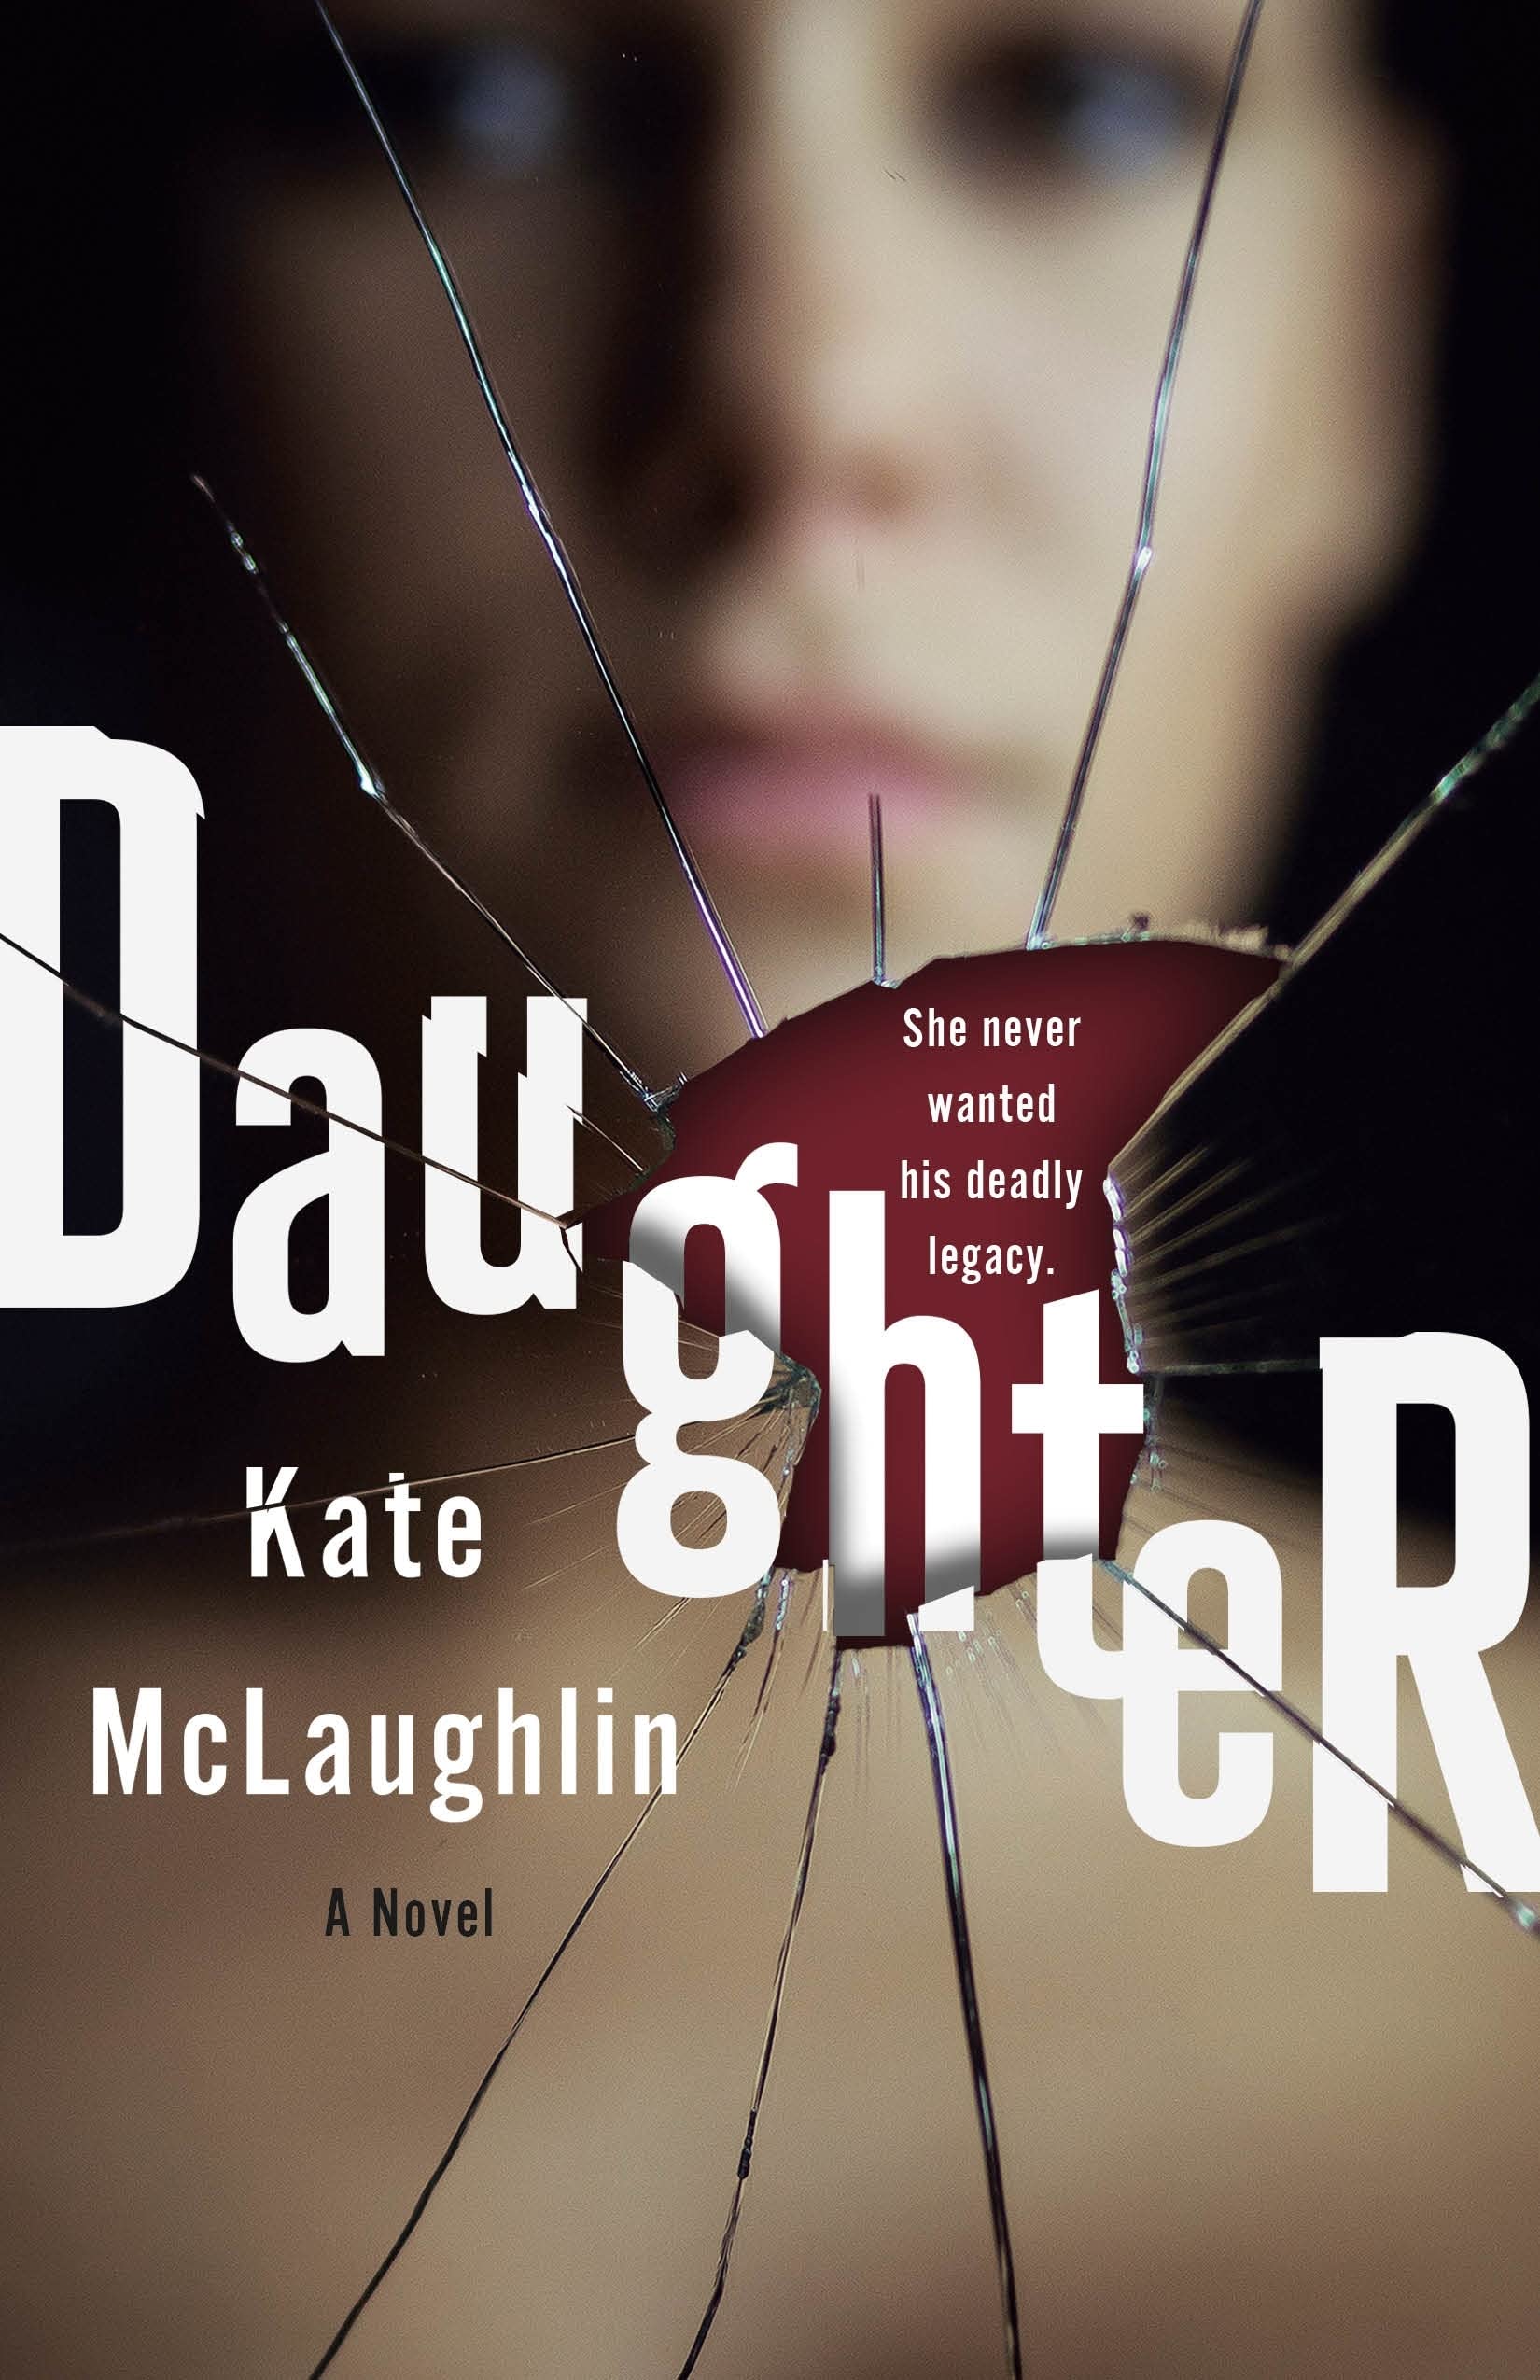 Cover of “Daughter” by Kate McLaughlin